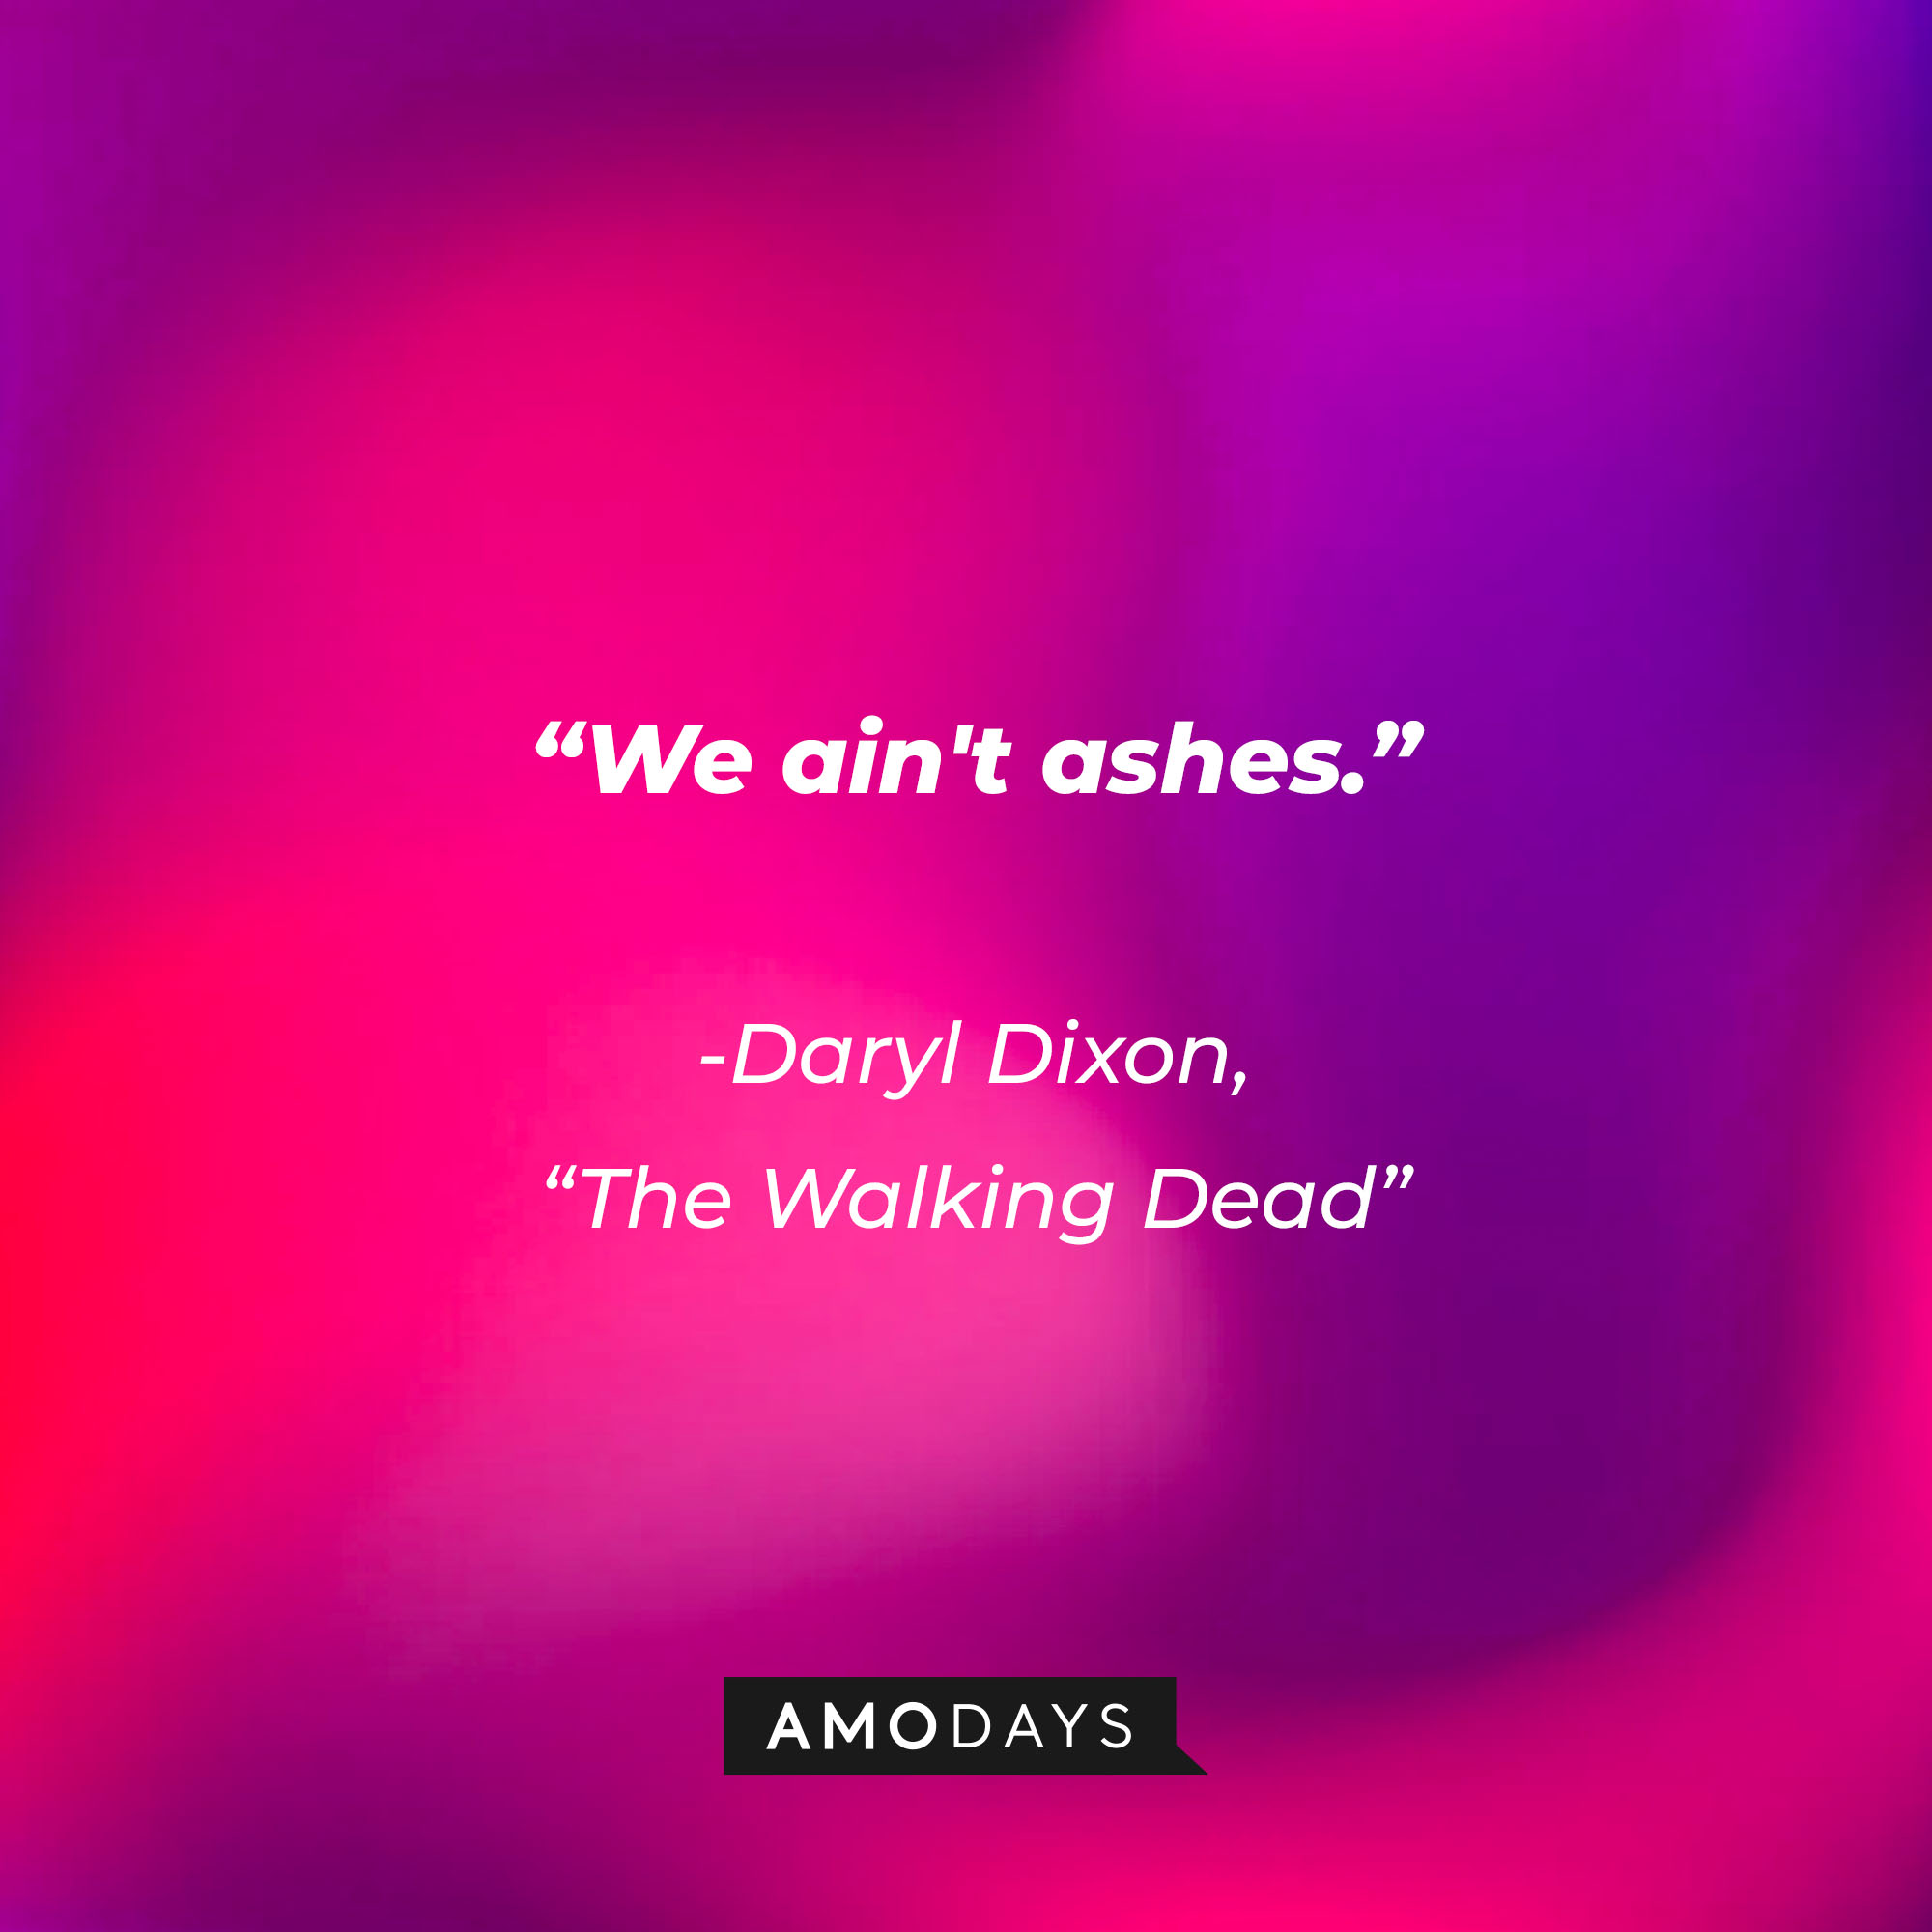 Daryl Dixon’s quote from “The Walking Dead”: “We ain't ashes.” | Source: AmoDays